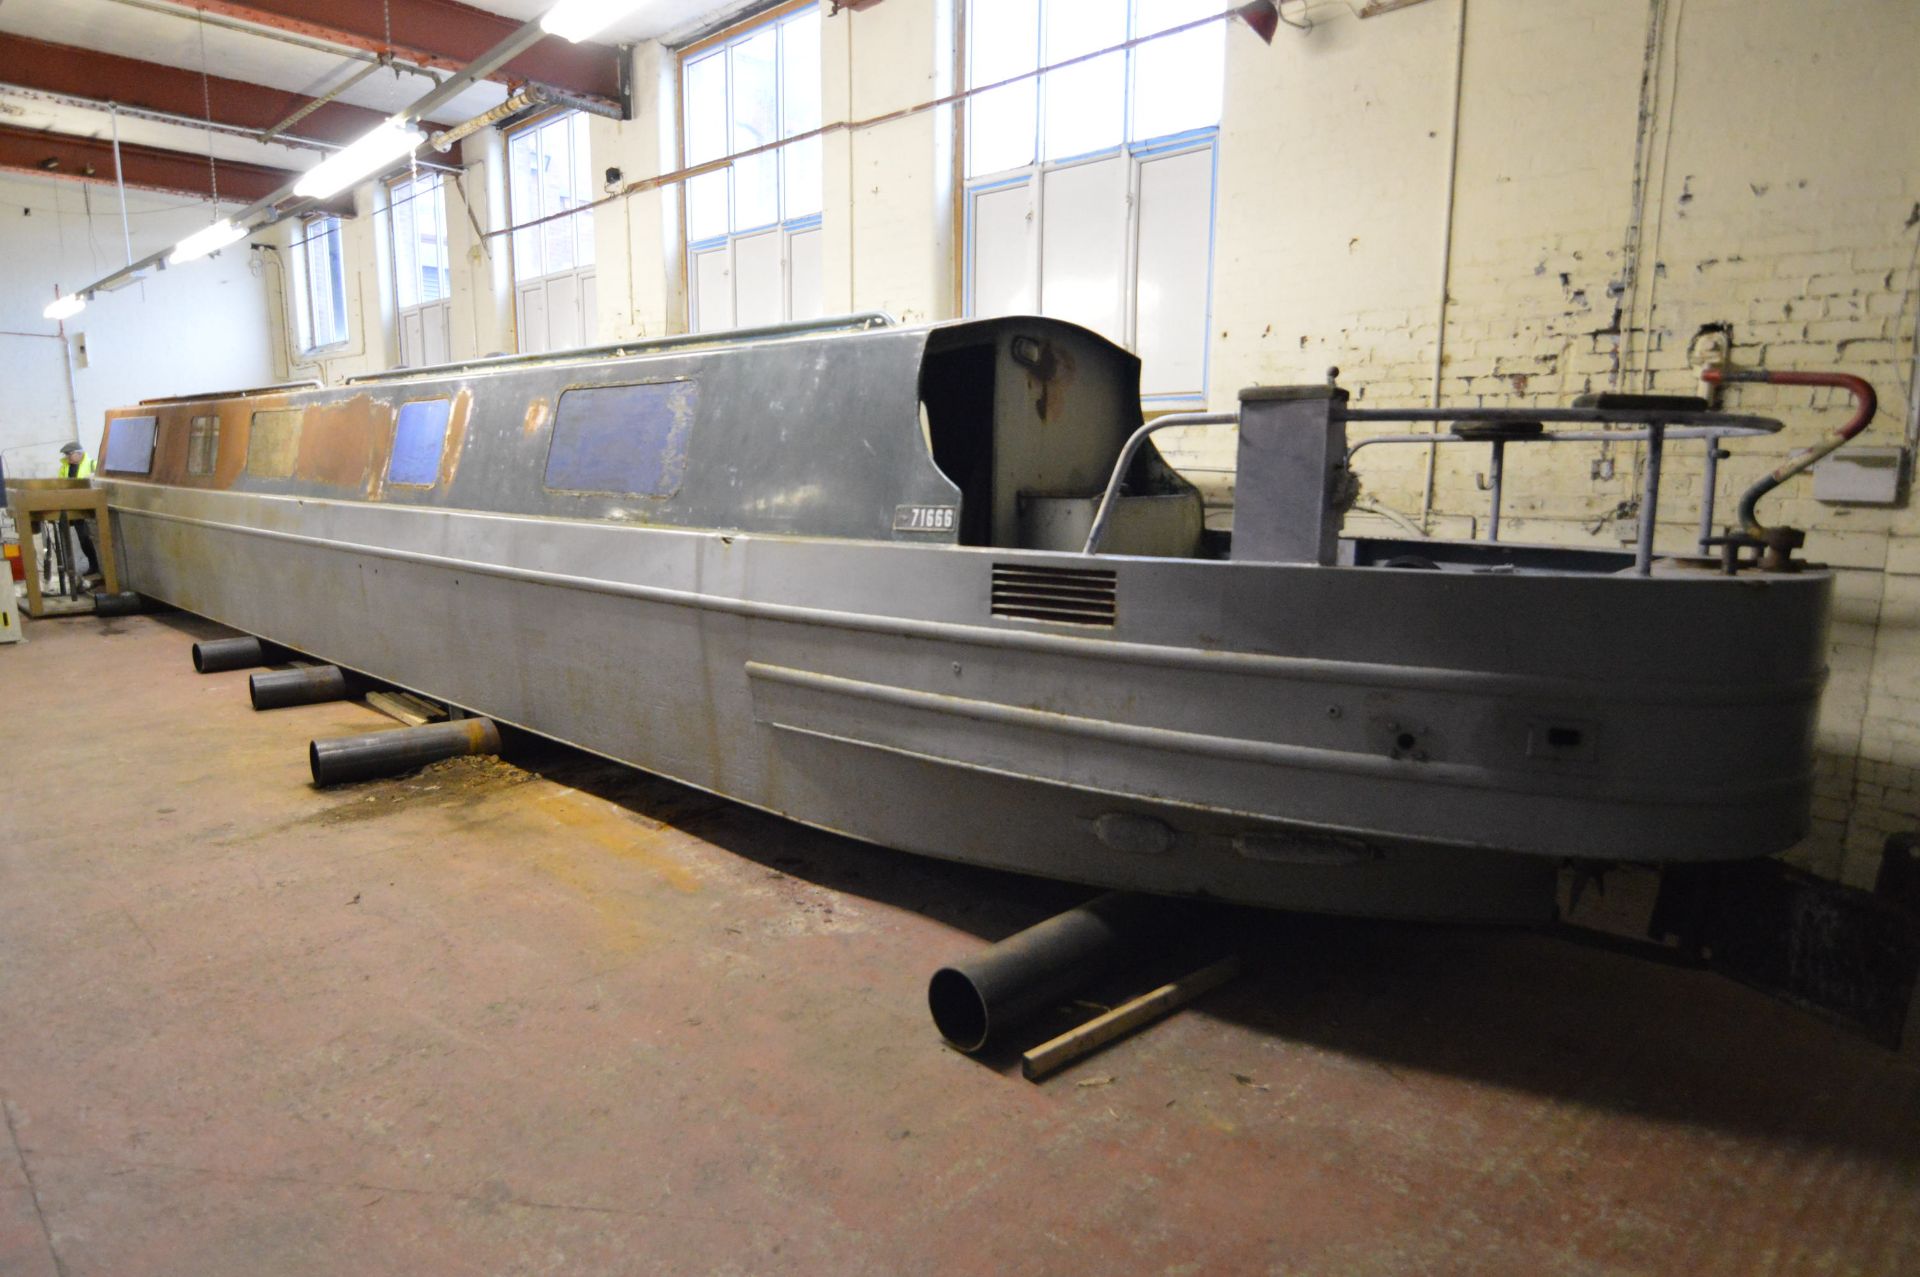 WELDED MILD STEEL CRUISER TYPE NARROWBOAT (known a